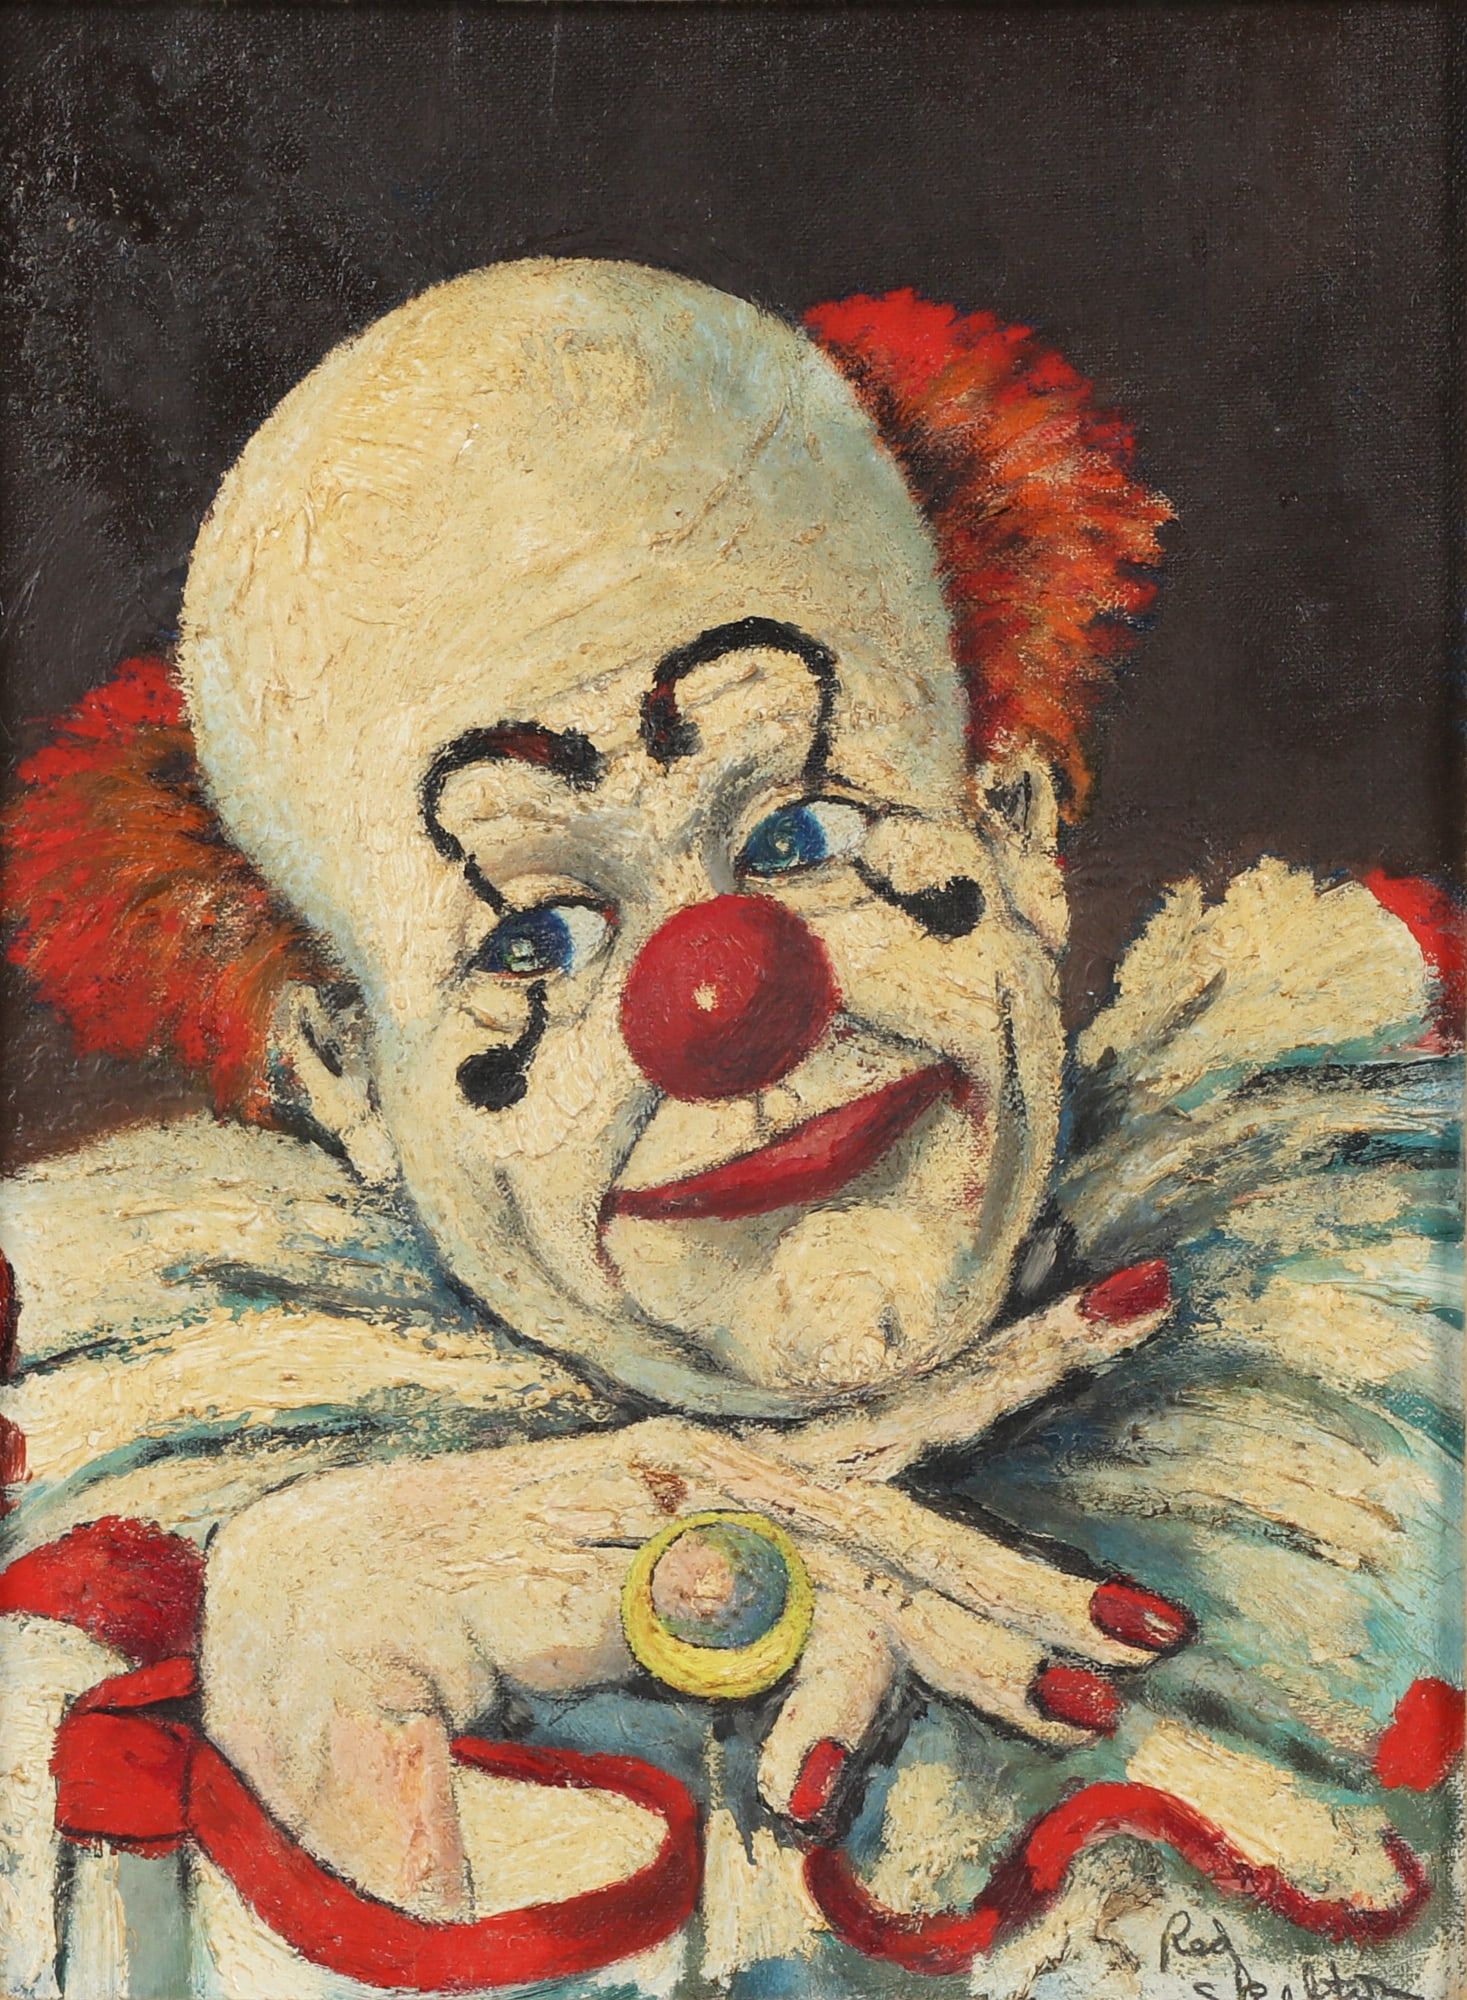 RED SKELTON, CLOWN WITH A PINKY RINGRed